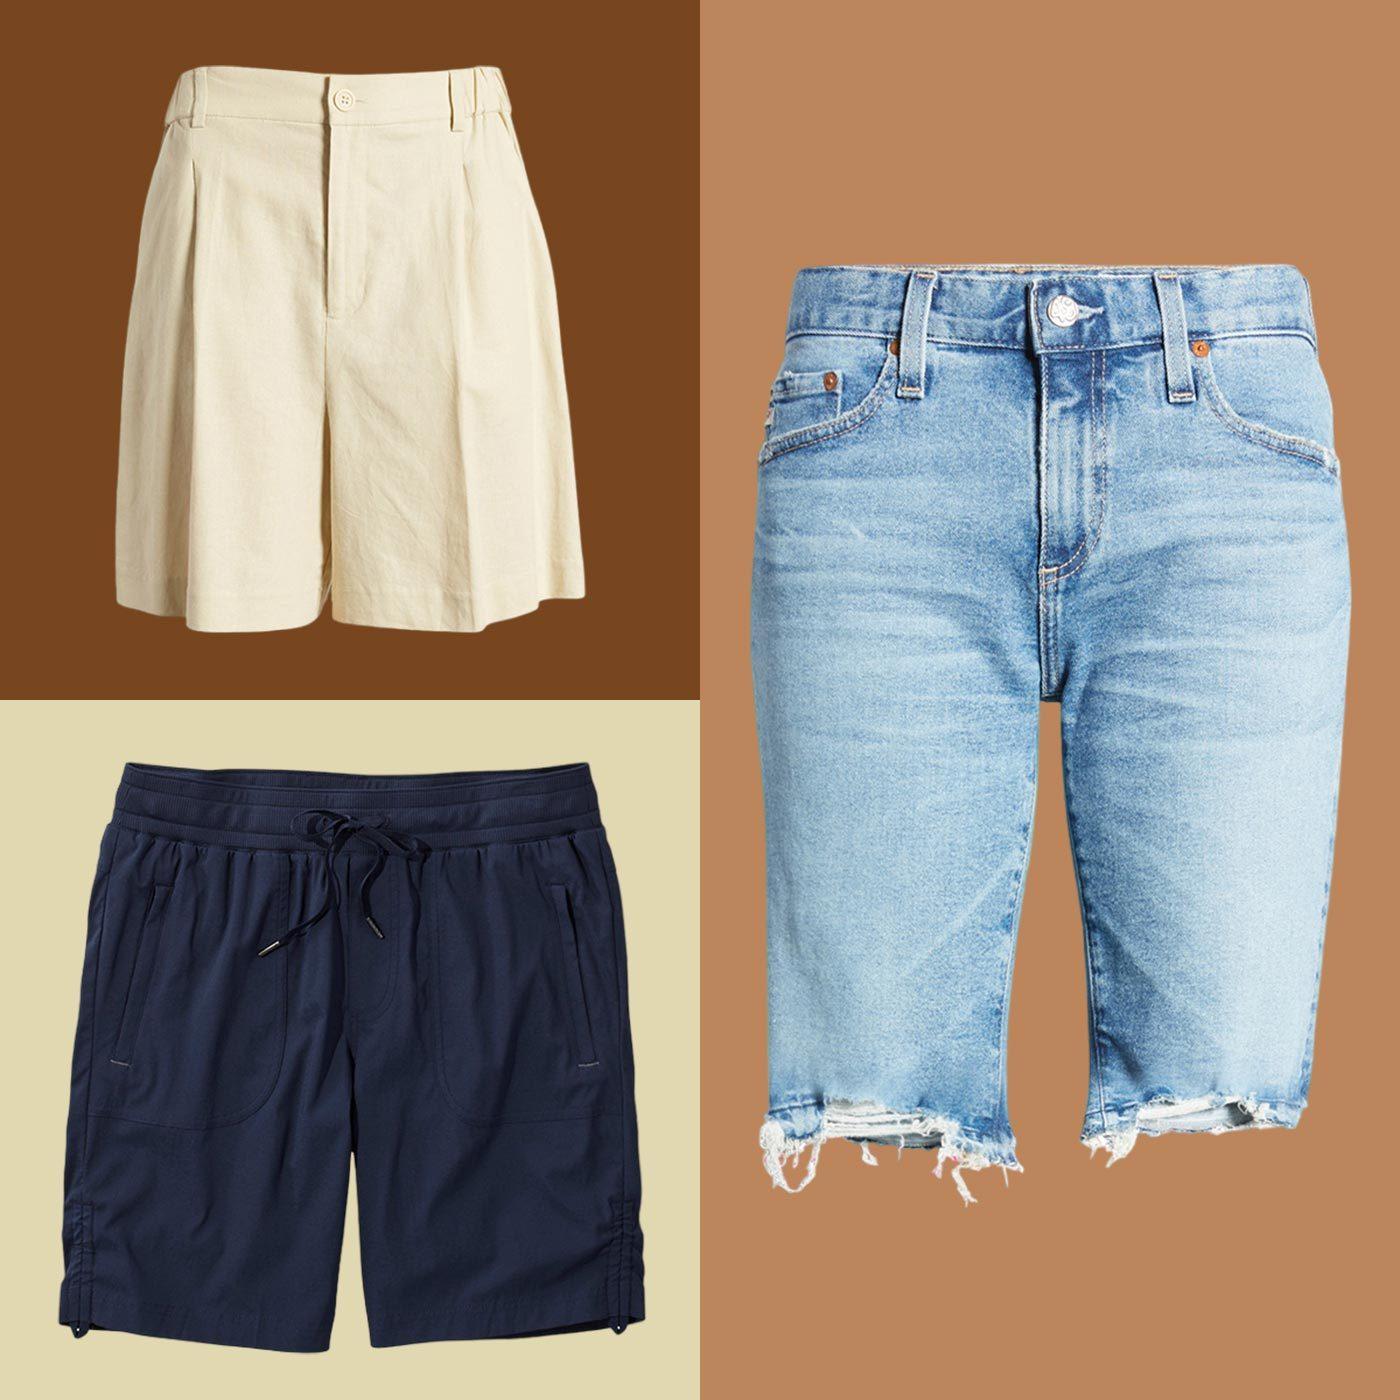 10 Bermuda Shorts To Wear This Spring and Summer